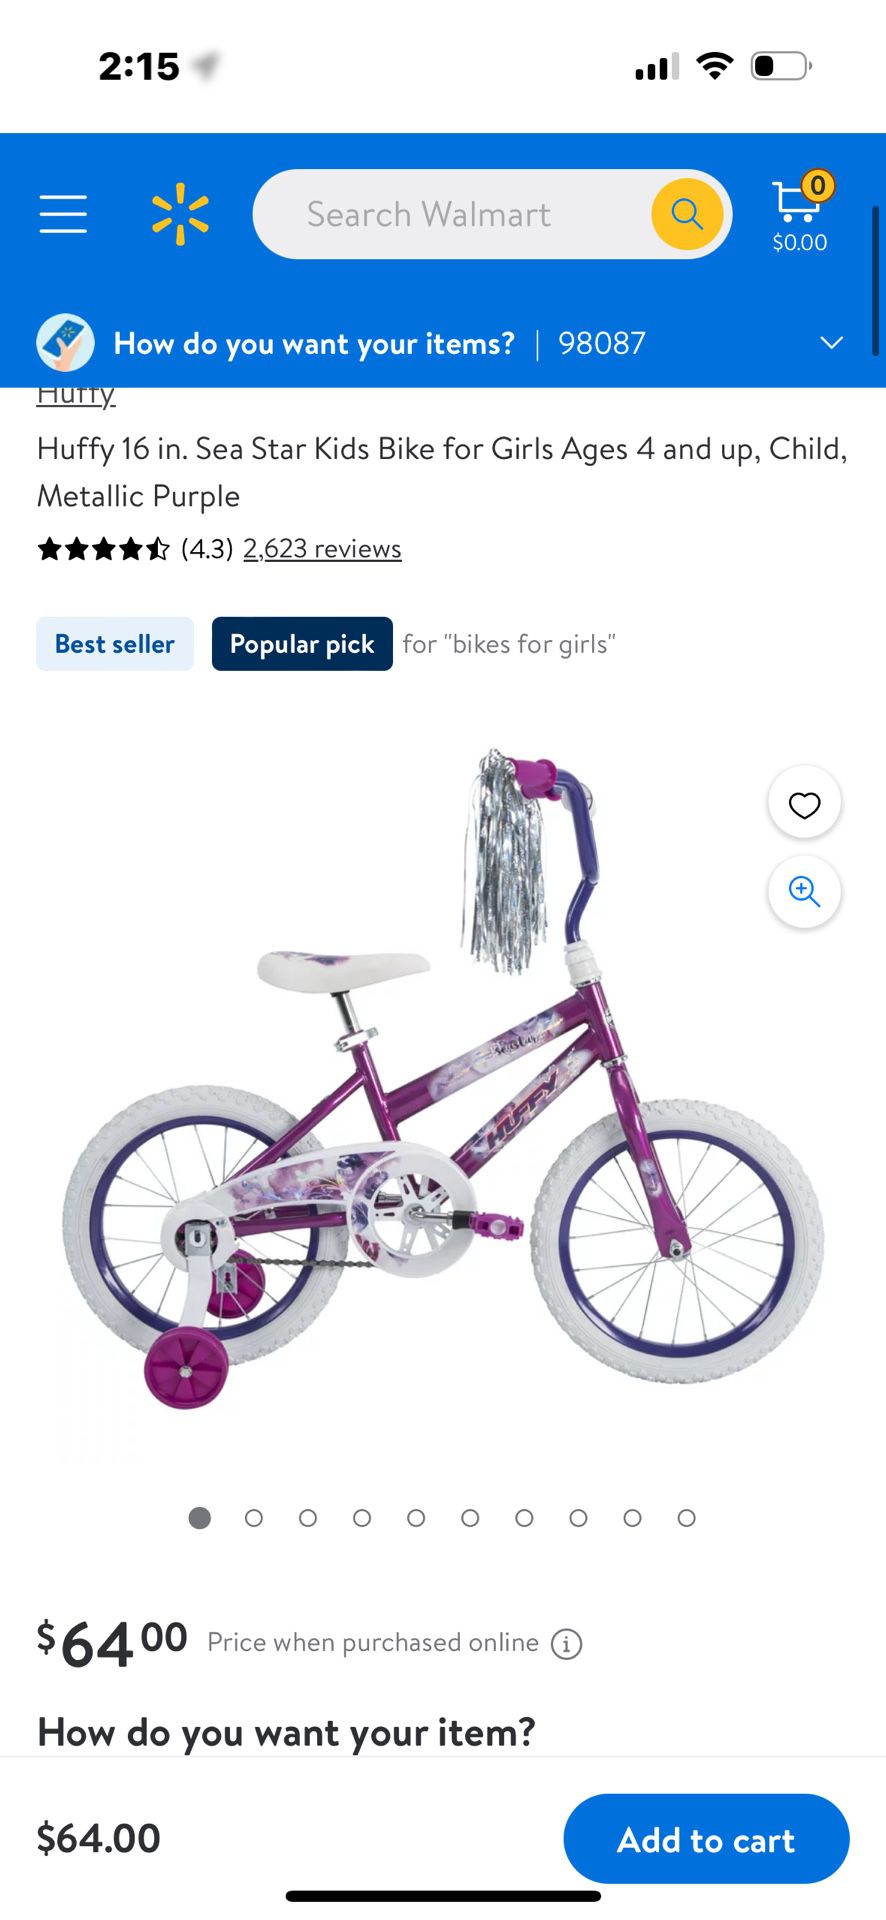 Huffy 16 in. Sea Star Kids Bike for Girls Ages 4 and up, Child, Metallic Purple